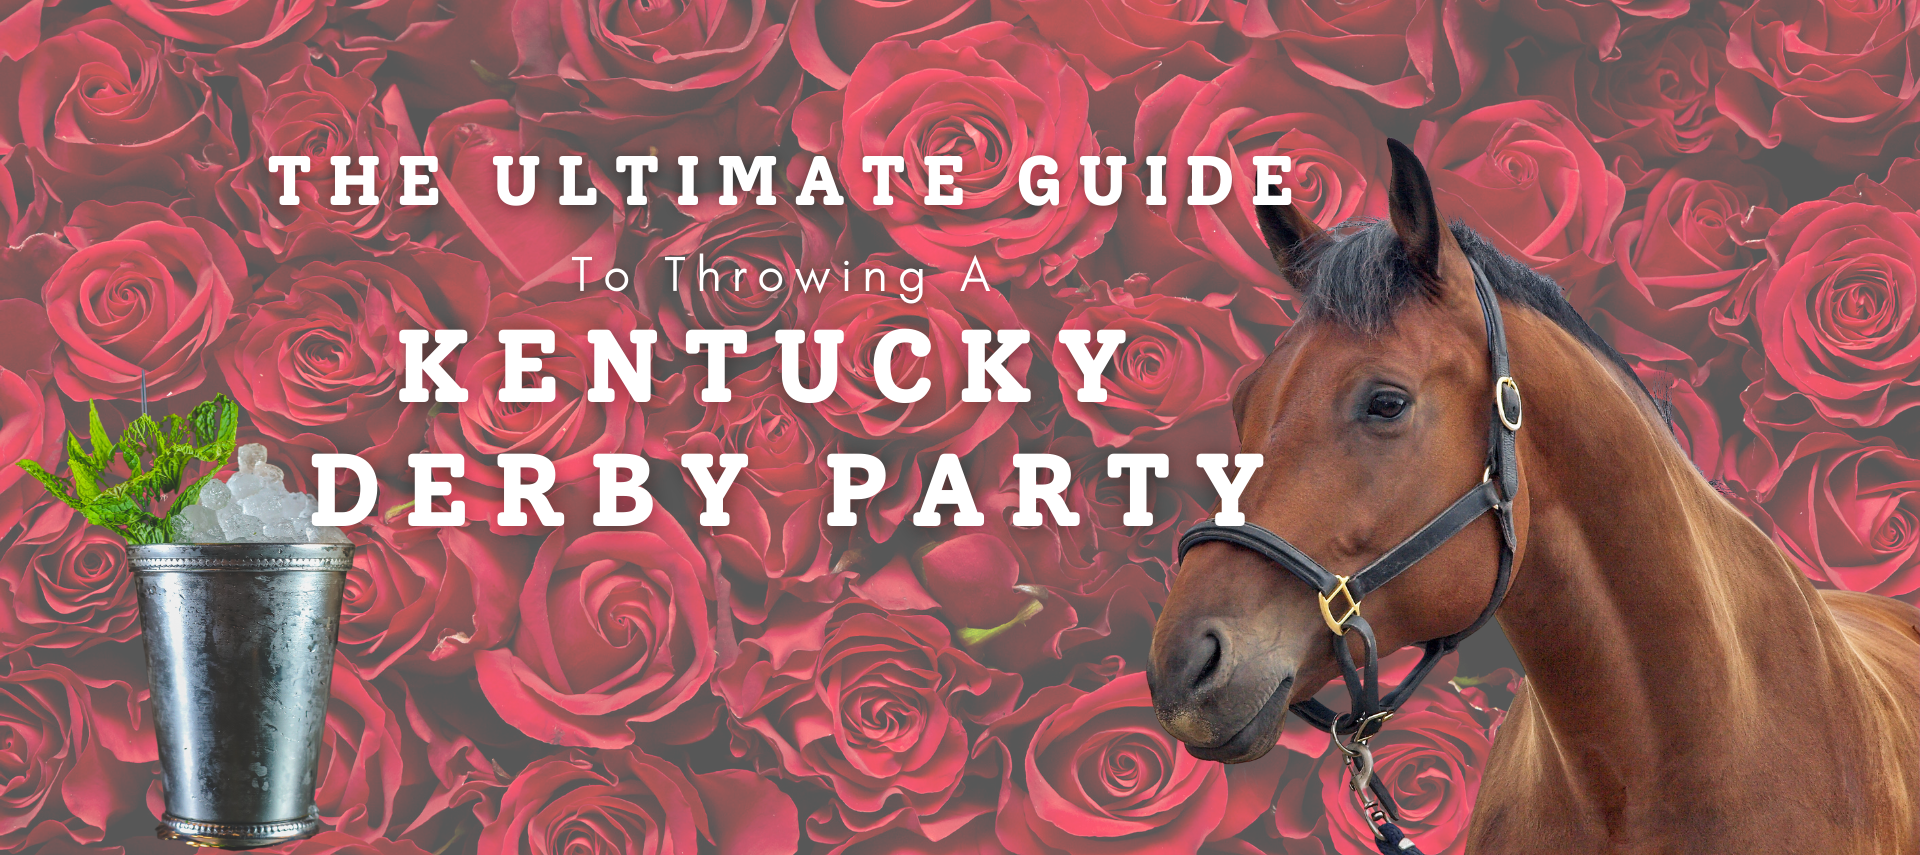 What to Wear to the Kentucky Derby: The Ultimate Guide - Let's Go